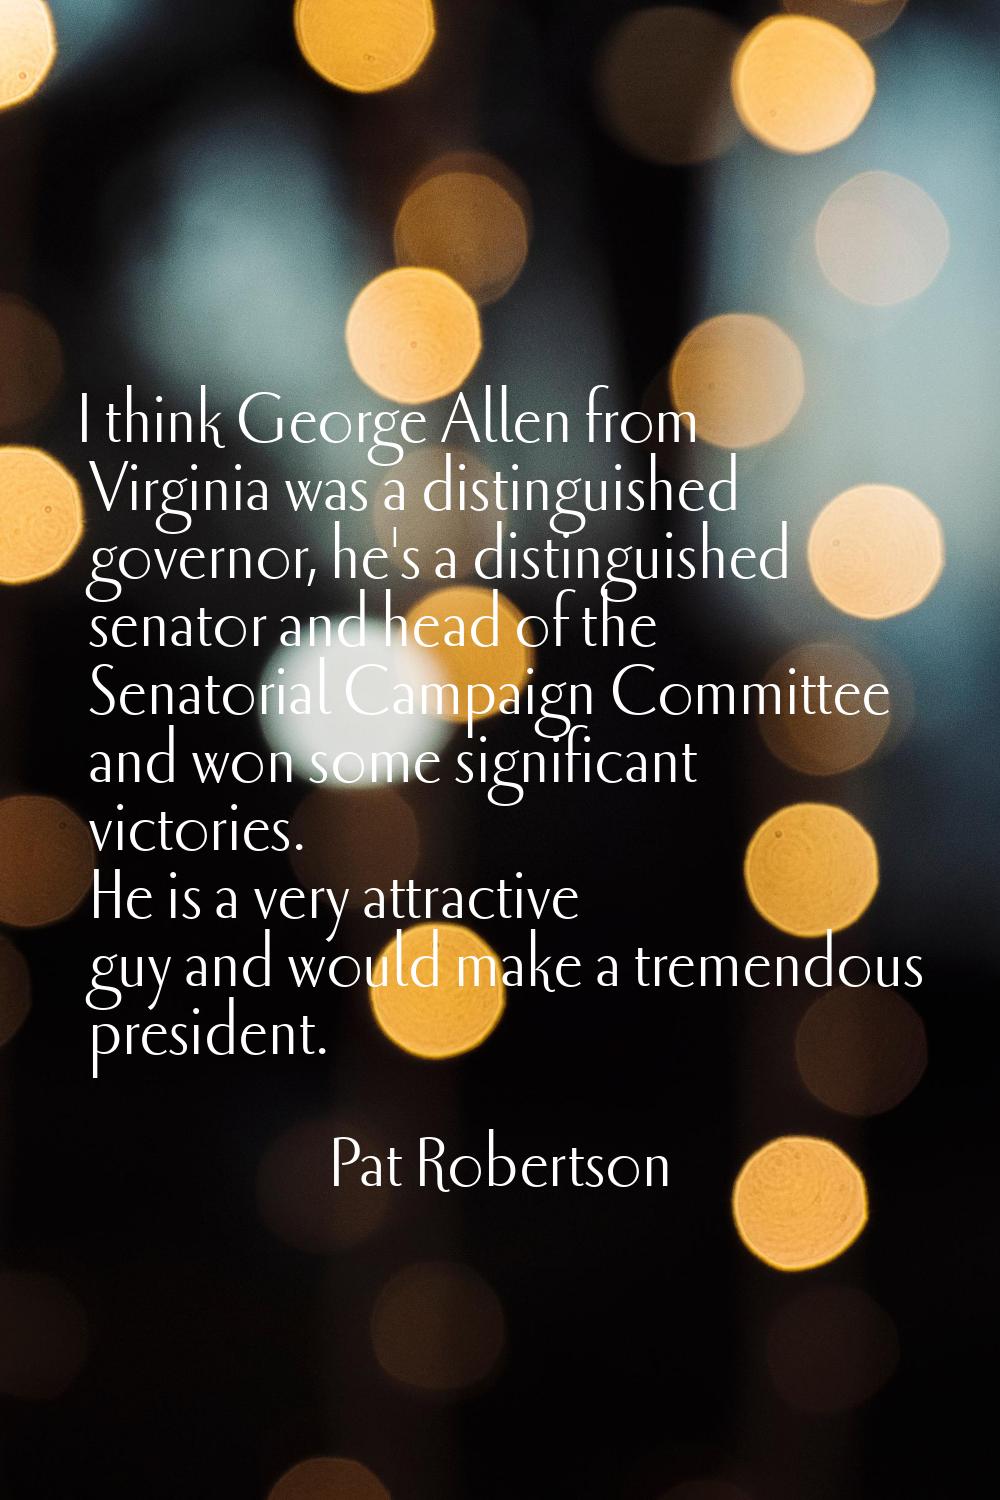 I think George Allen from Virginia was a distinguished governor, he's a distinguished senator and h